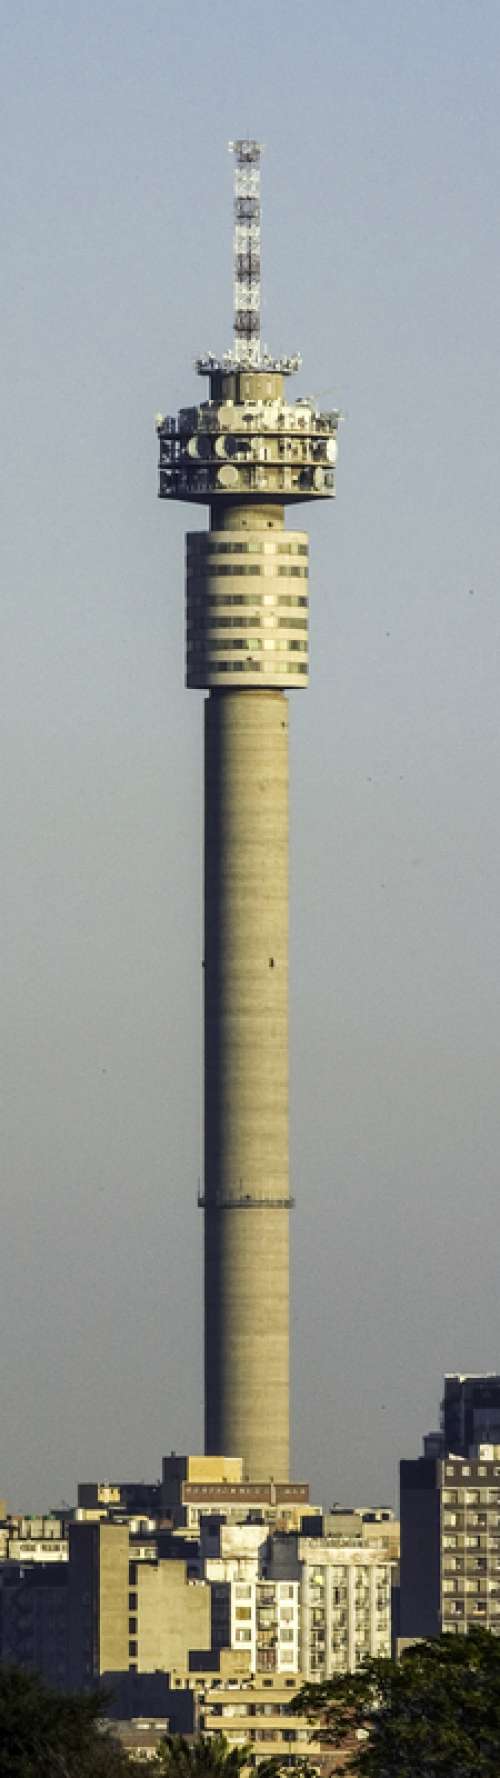 The Hillbrow Tower in Johannesburg, South Africa free photo